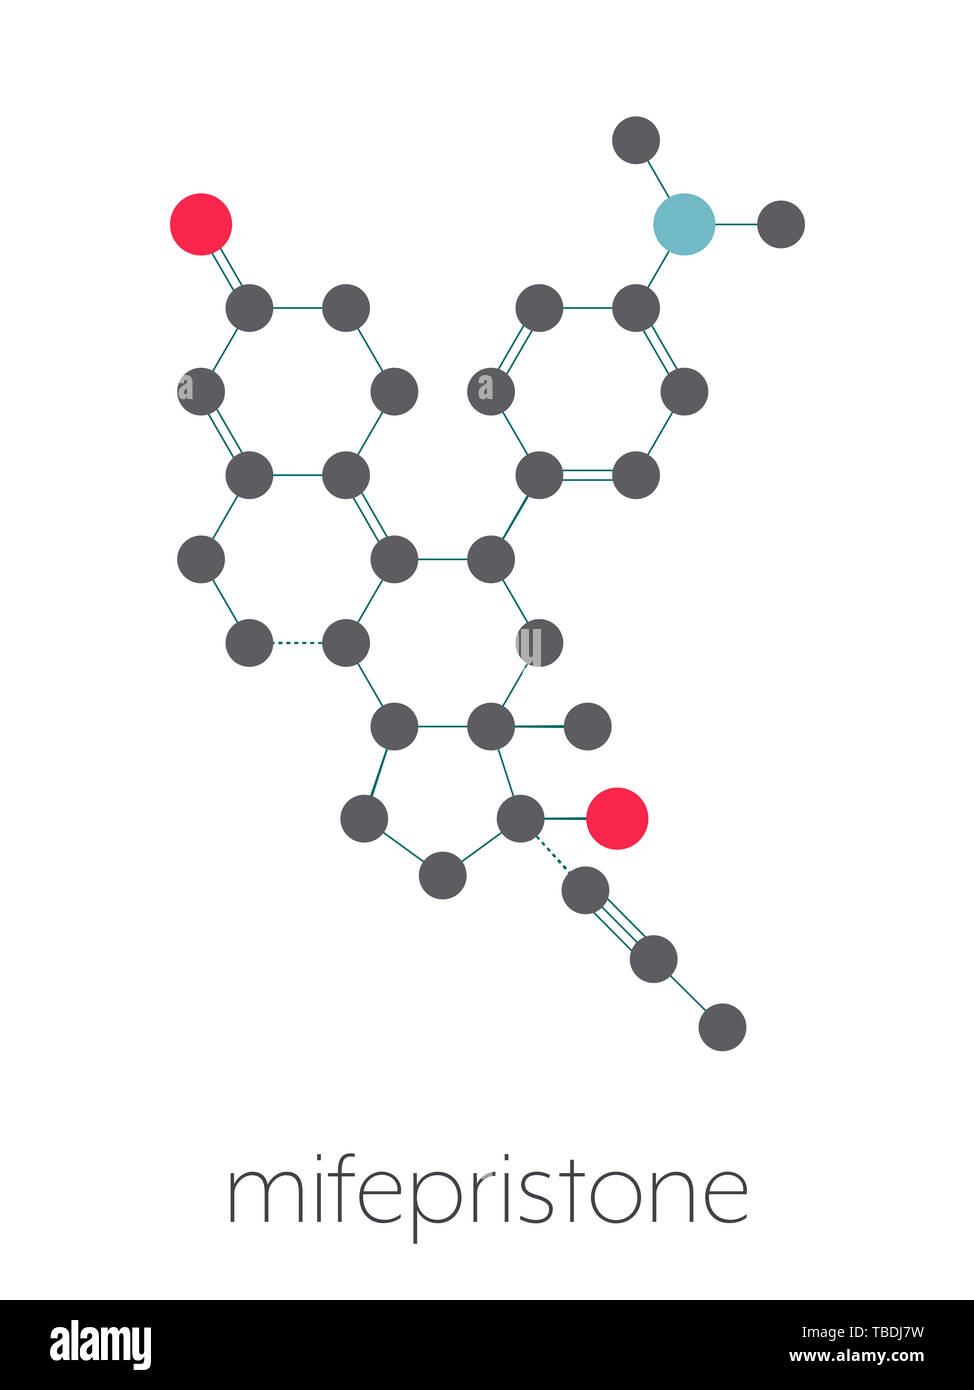 Mifepristone abortion-inducing drug molecule. Also used as emergency contraceptive agent. Stylized skeletal formula (chemical structure). Atoms are shown as color-coded circles connected by thin bonds, on a white background: hydrogen (hidden), carbon (grey), oxygen (red), nitrogen (blue) Stock Photo